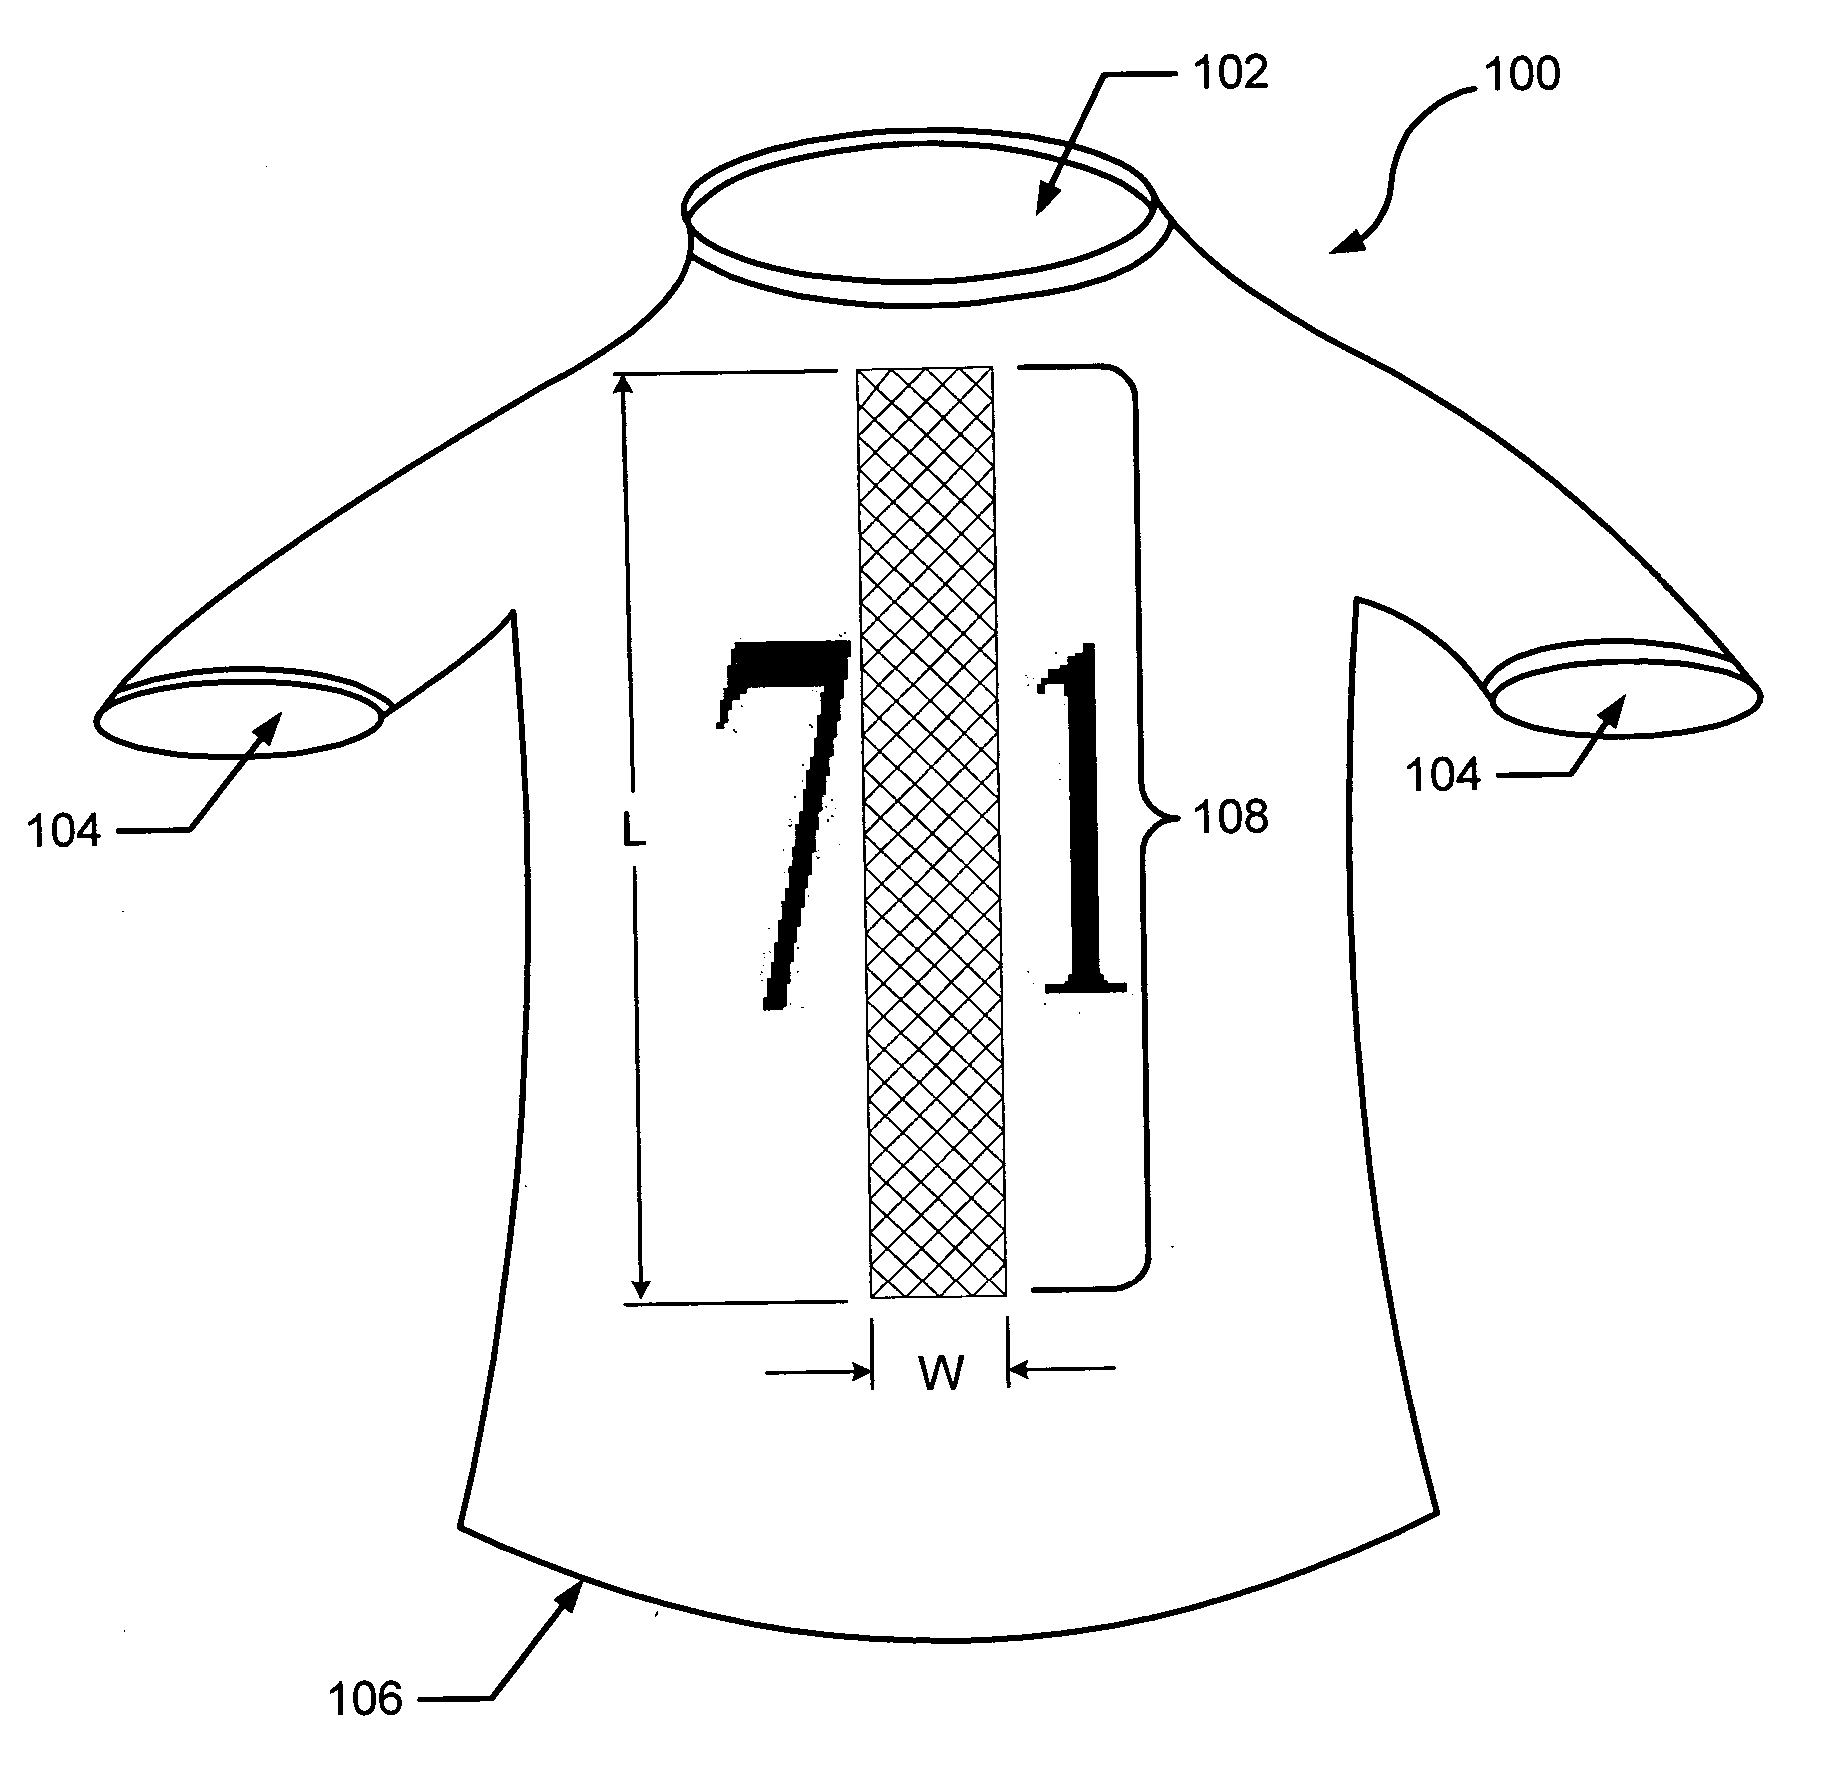 Article of apparel incorporating a zoned modifiable textile structure